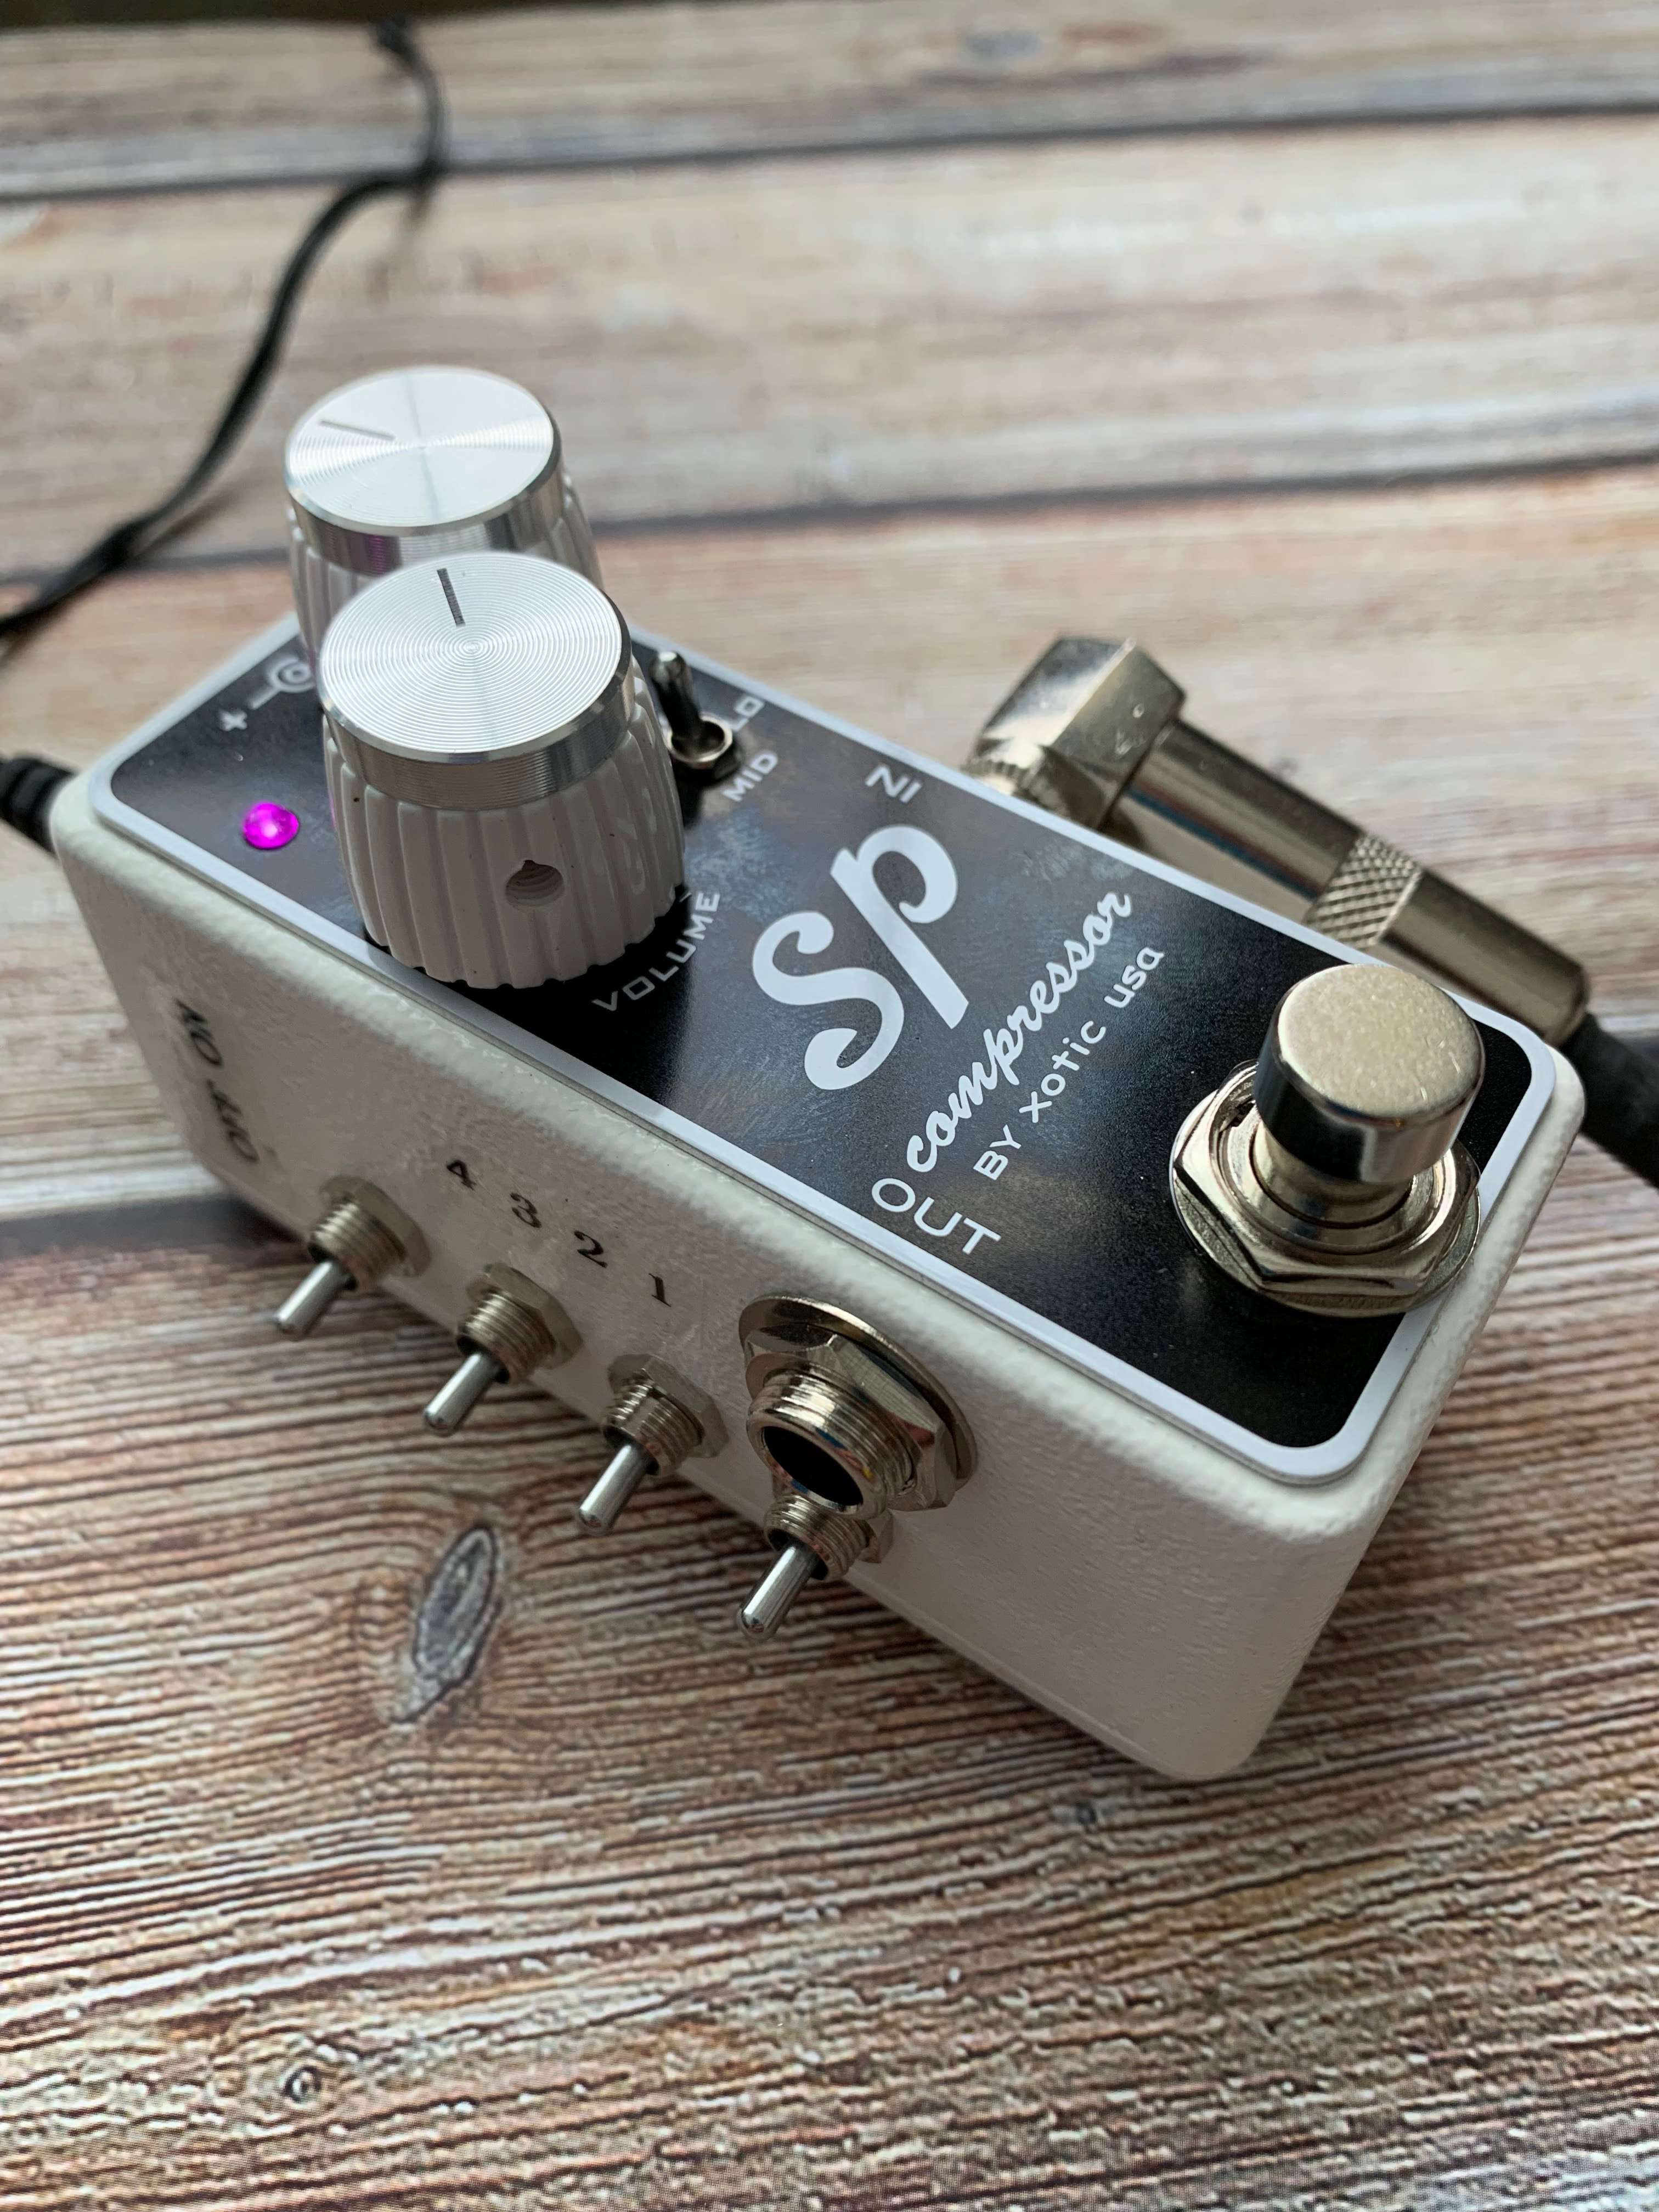 Brand New Alchemy Audio Upgraded and Modified Xotic Effects SP Compressor!